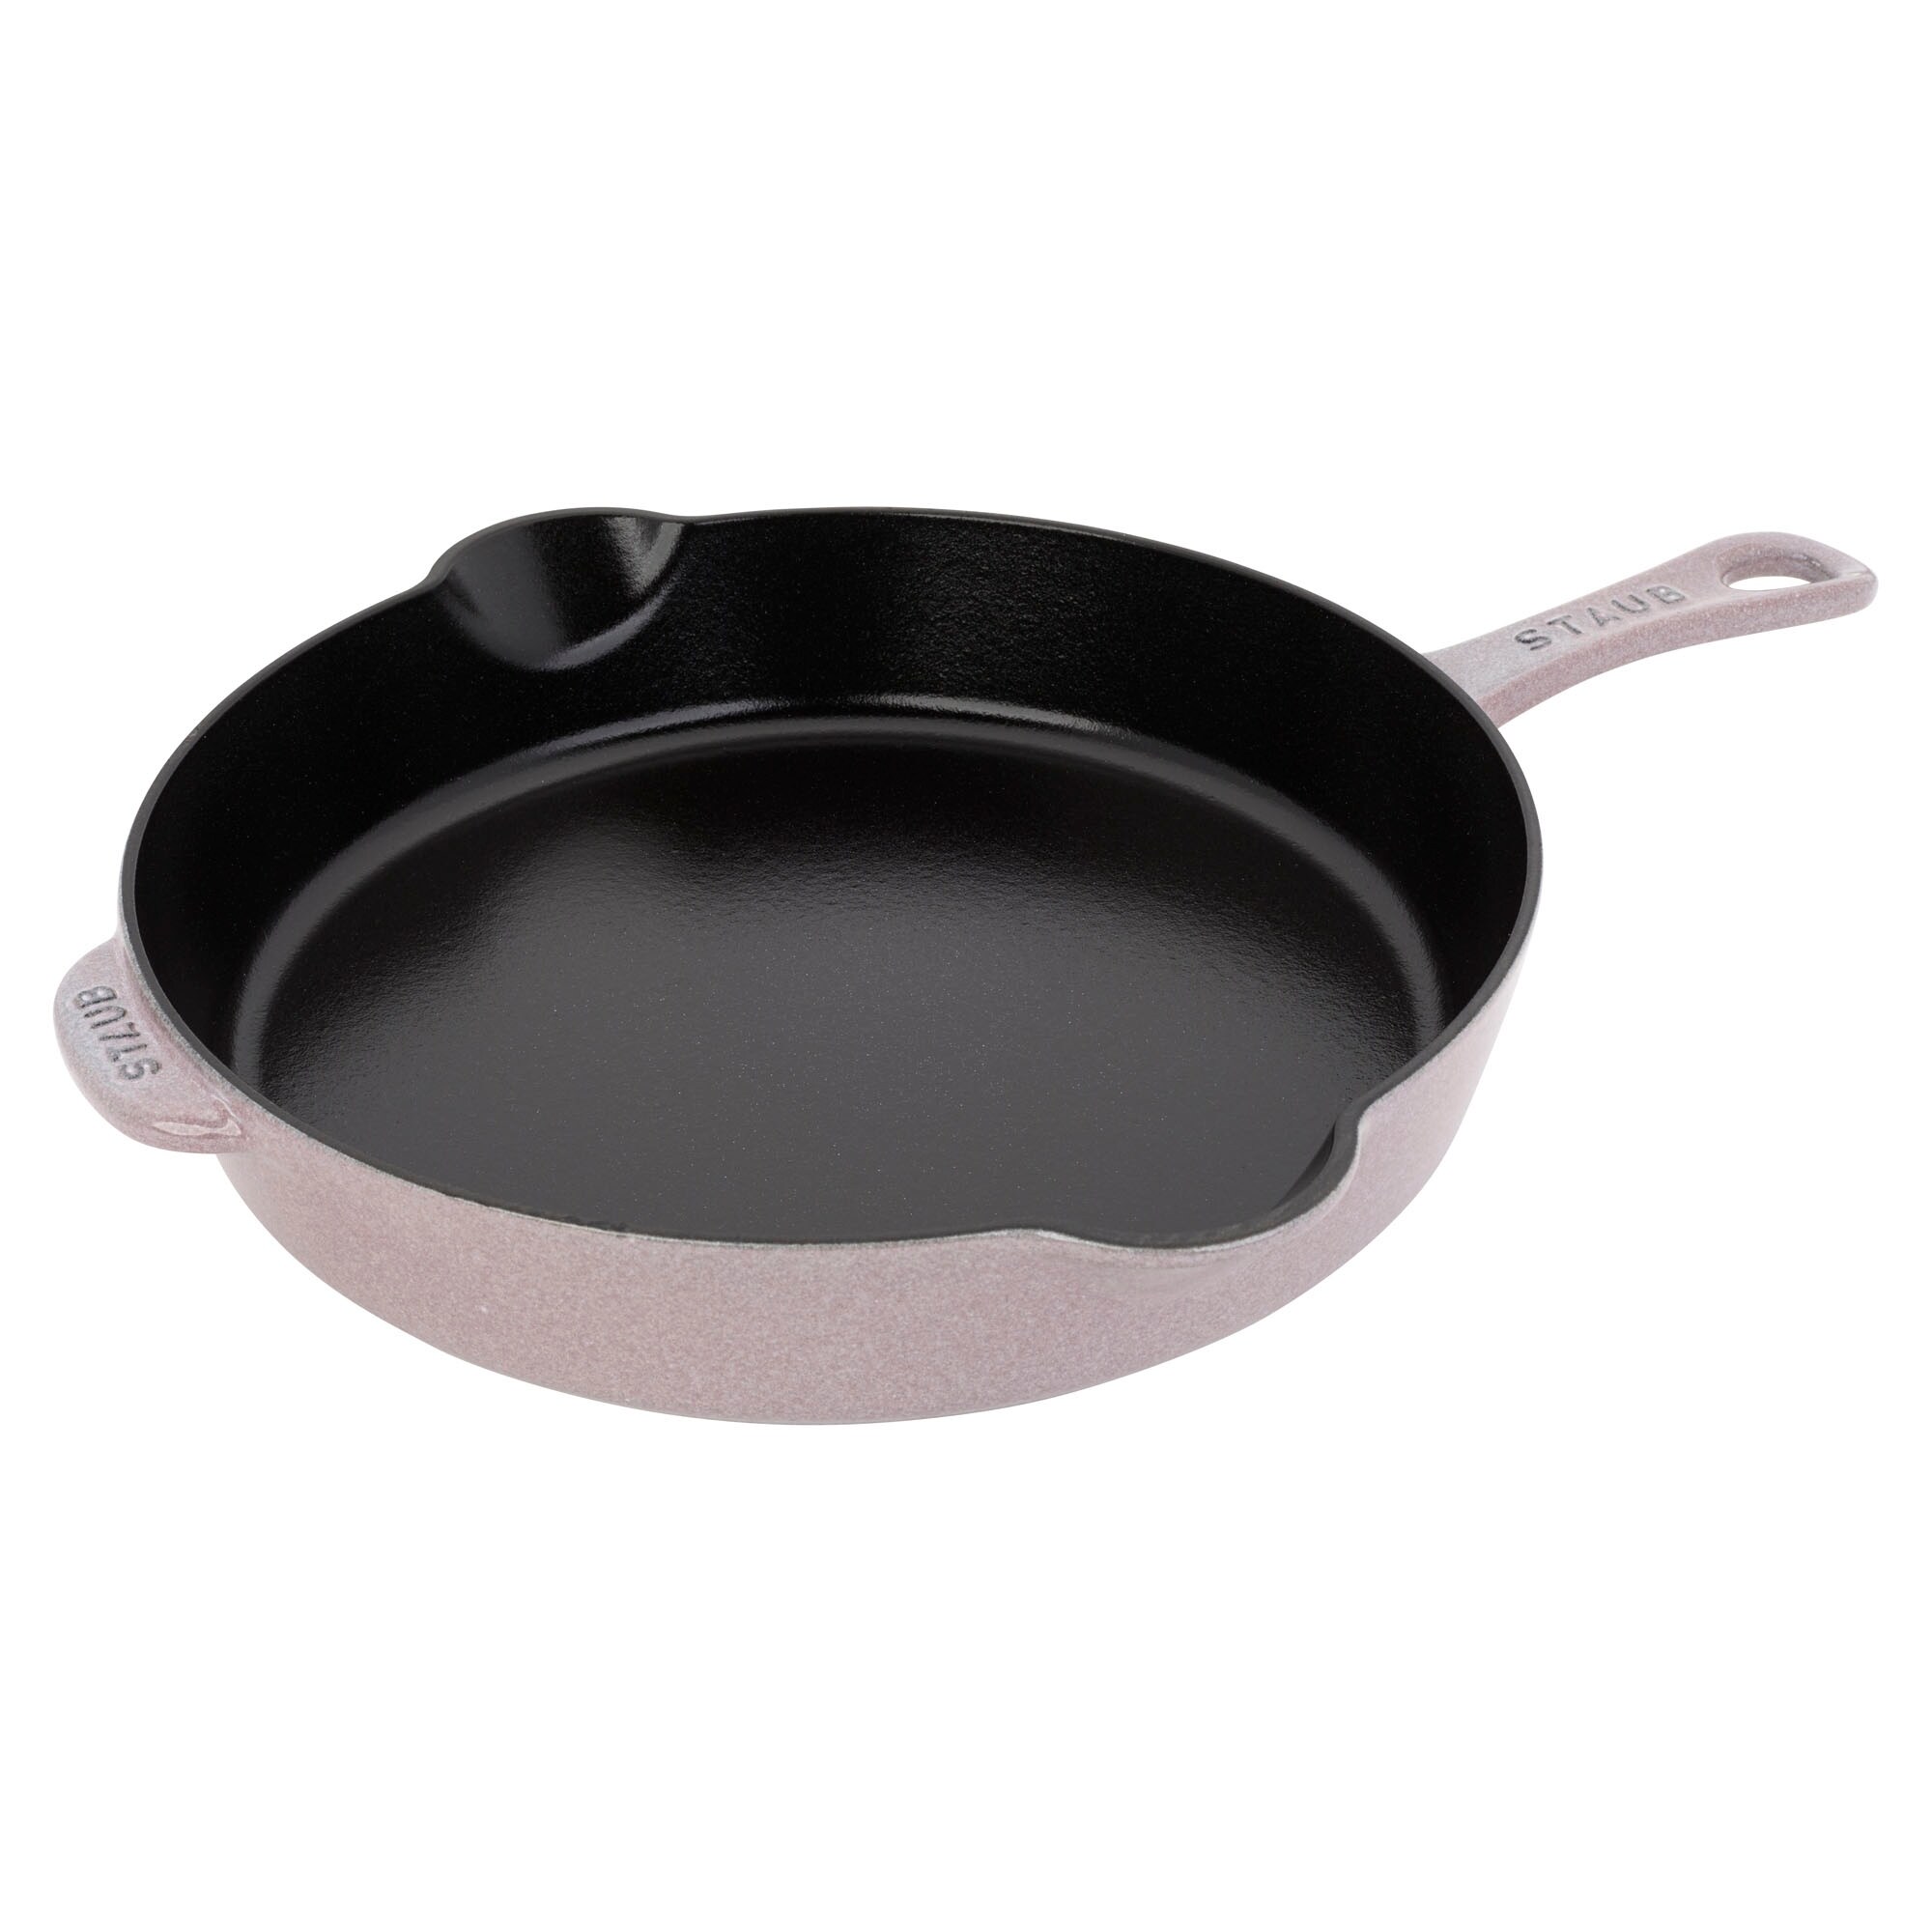 https://ak1.ostkcdn.com/images/products/is/images/direct/4ba4cb810ad4abe4c2c04dd7b0ee53fb83b6631d/STAUB-Cast-Iron-11-inch-Traditional-Skillet.jpg